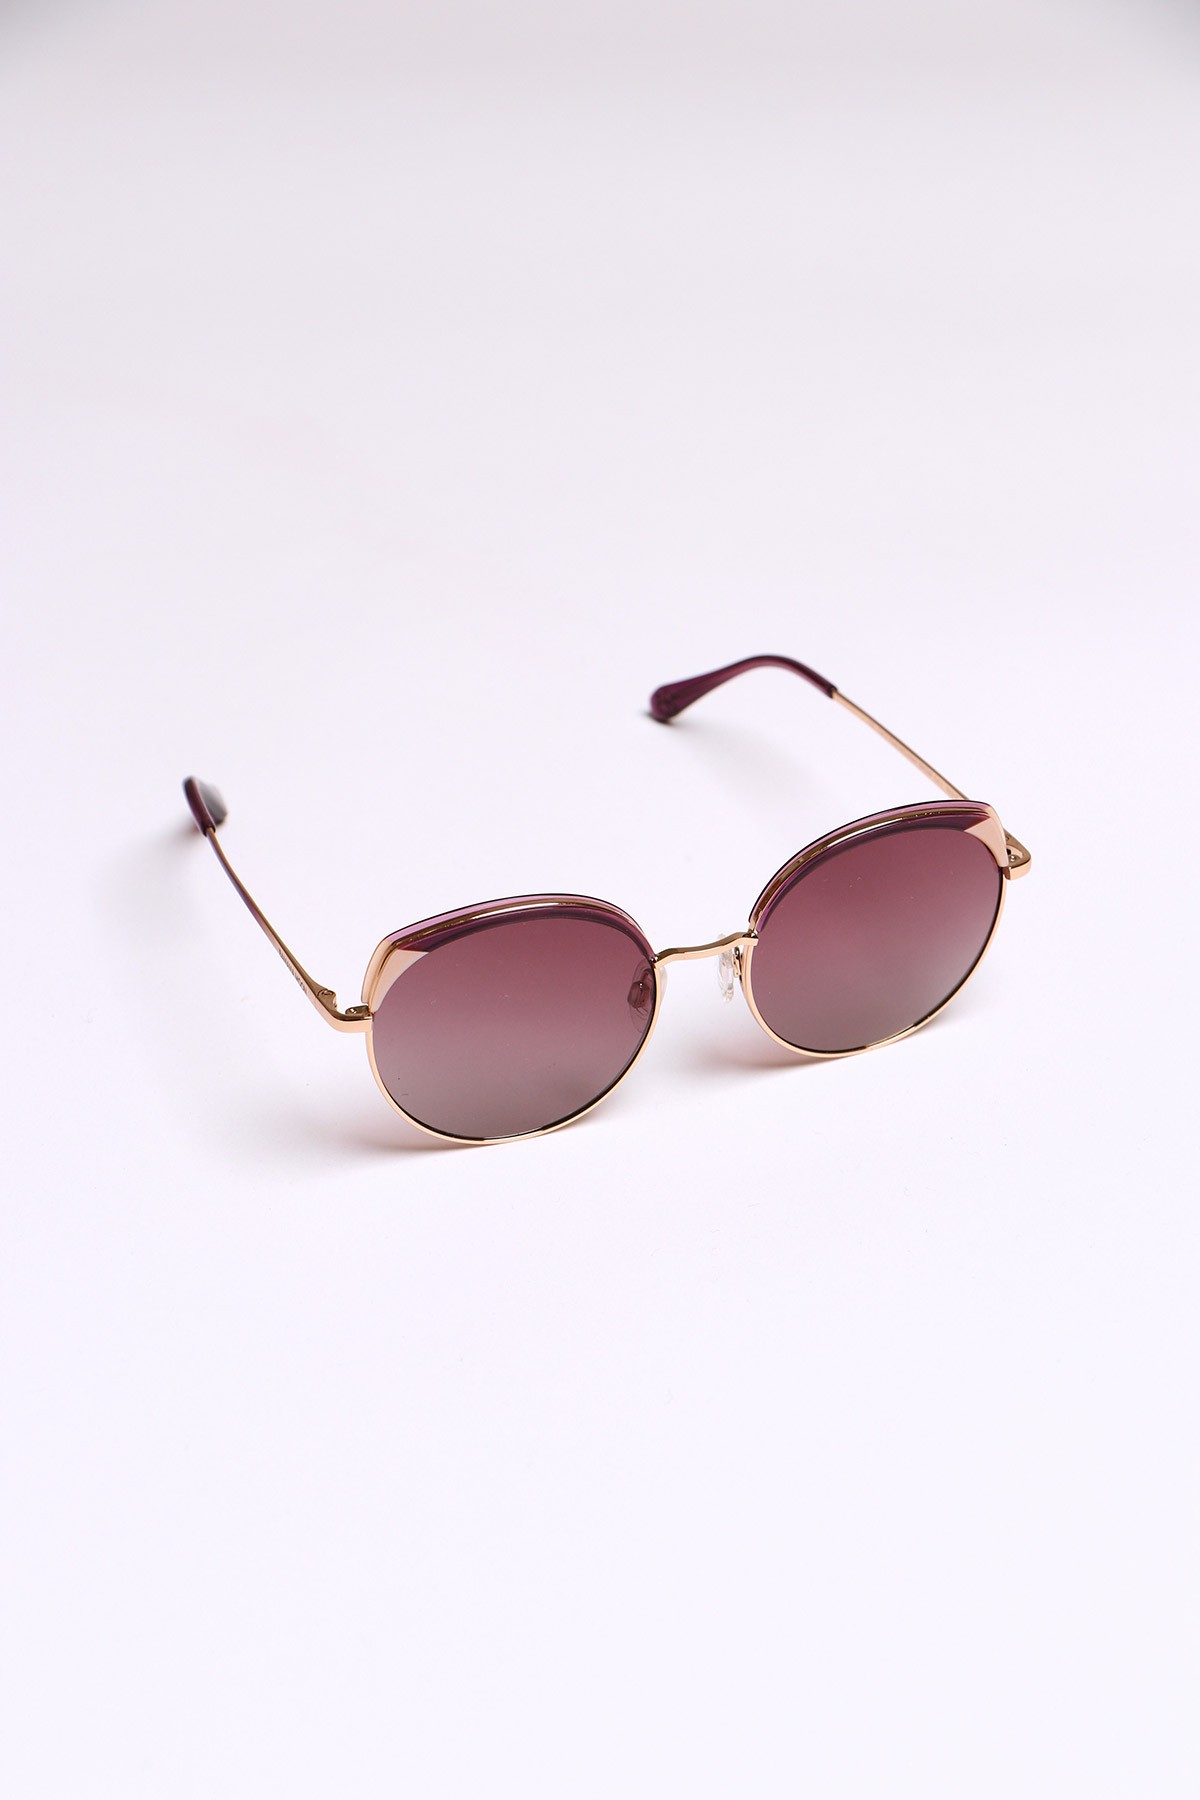 chanel butterfly sunglasses 5414